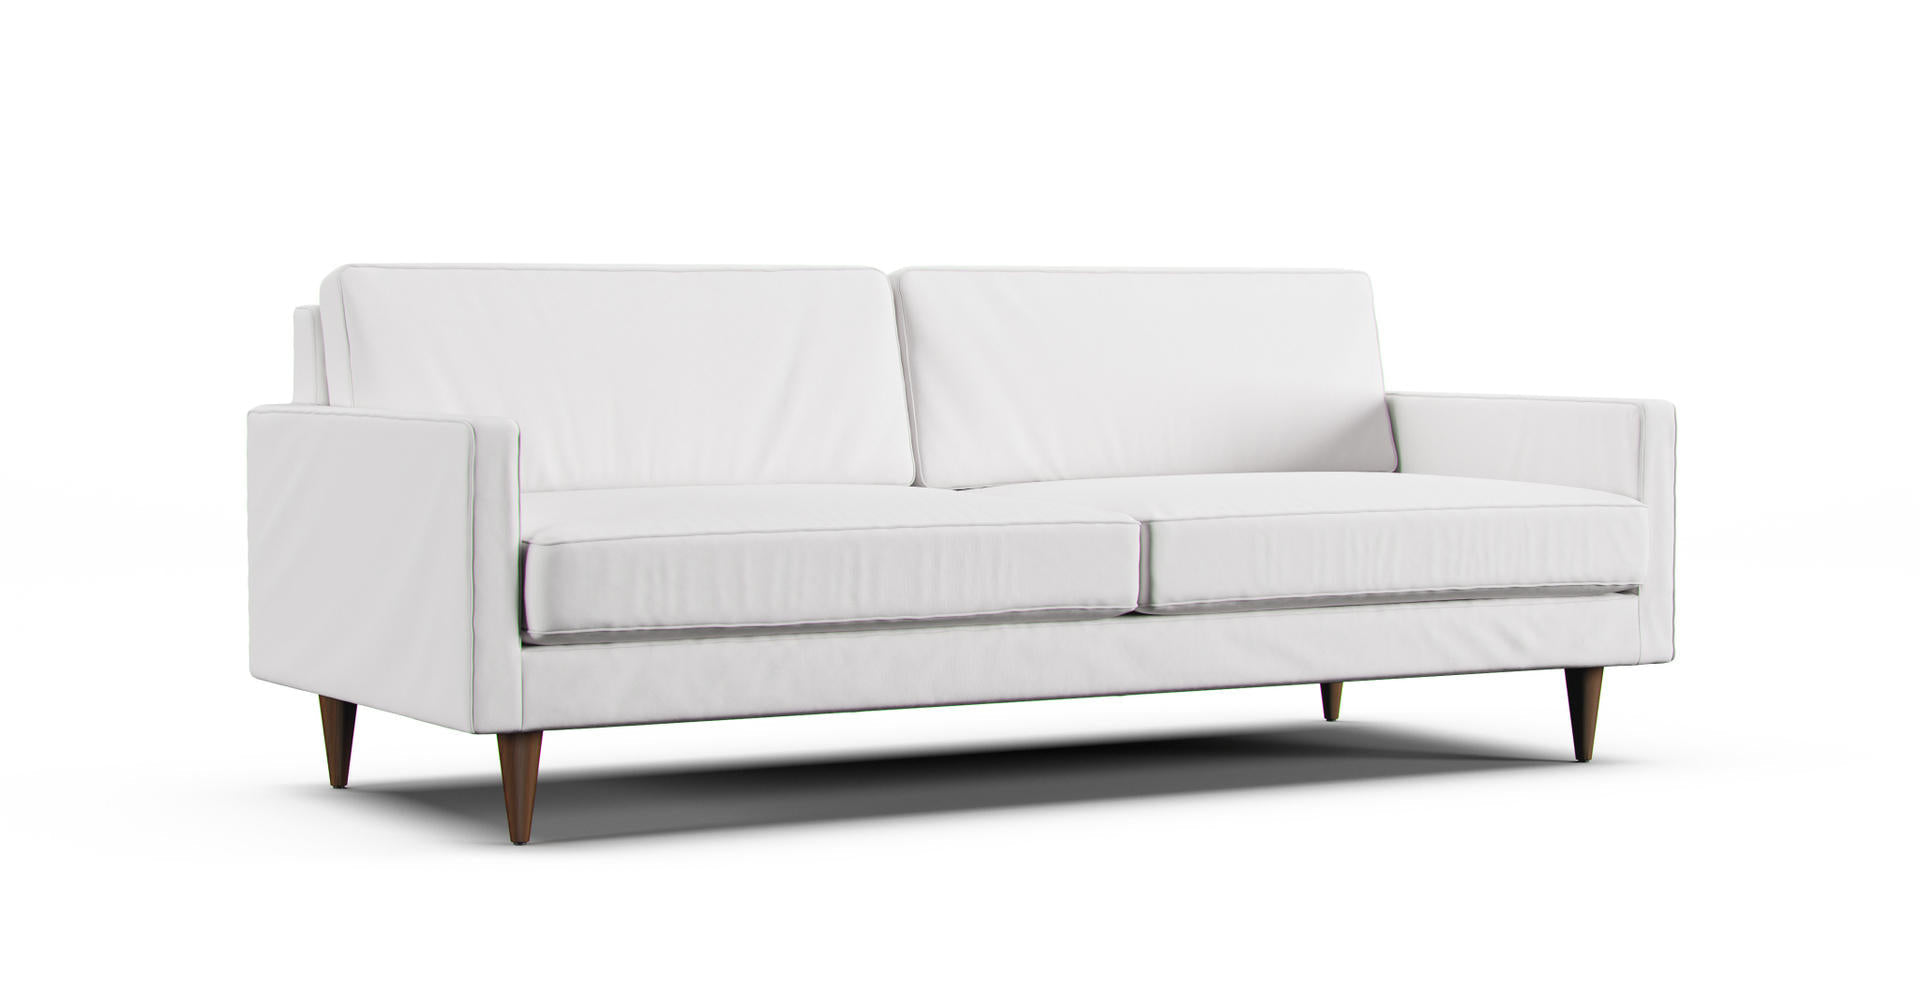 Joybird Eliot sofa in a white Cotton Canvas cover, on a pure white background